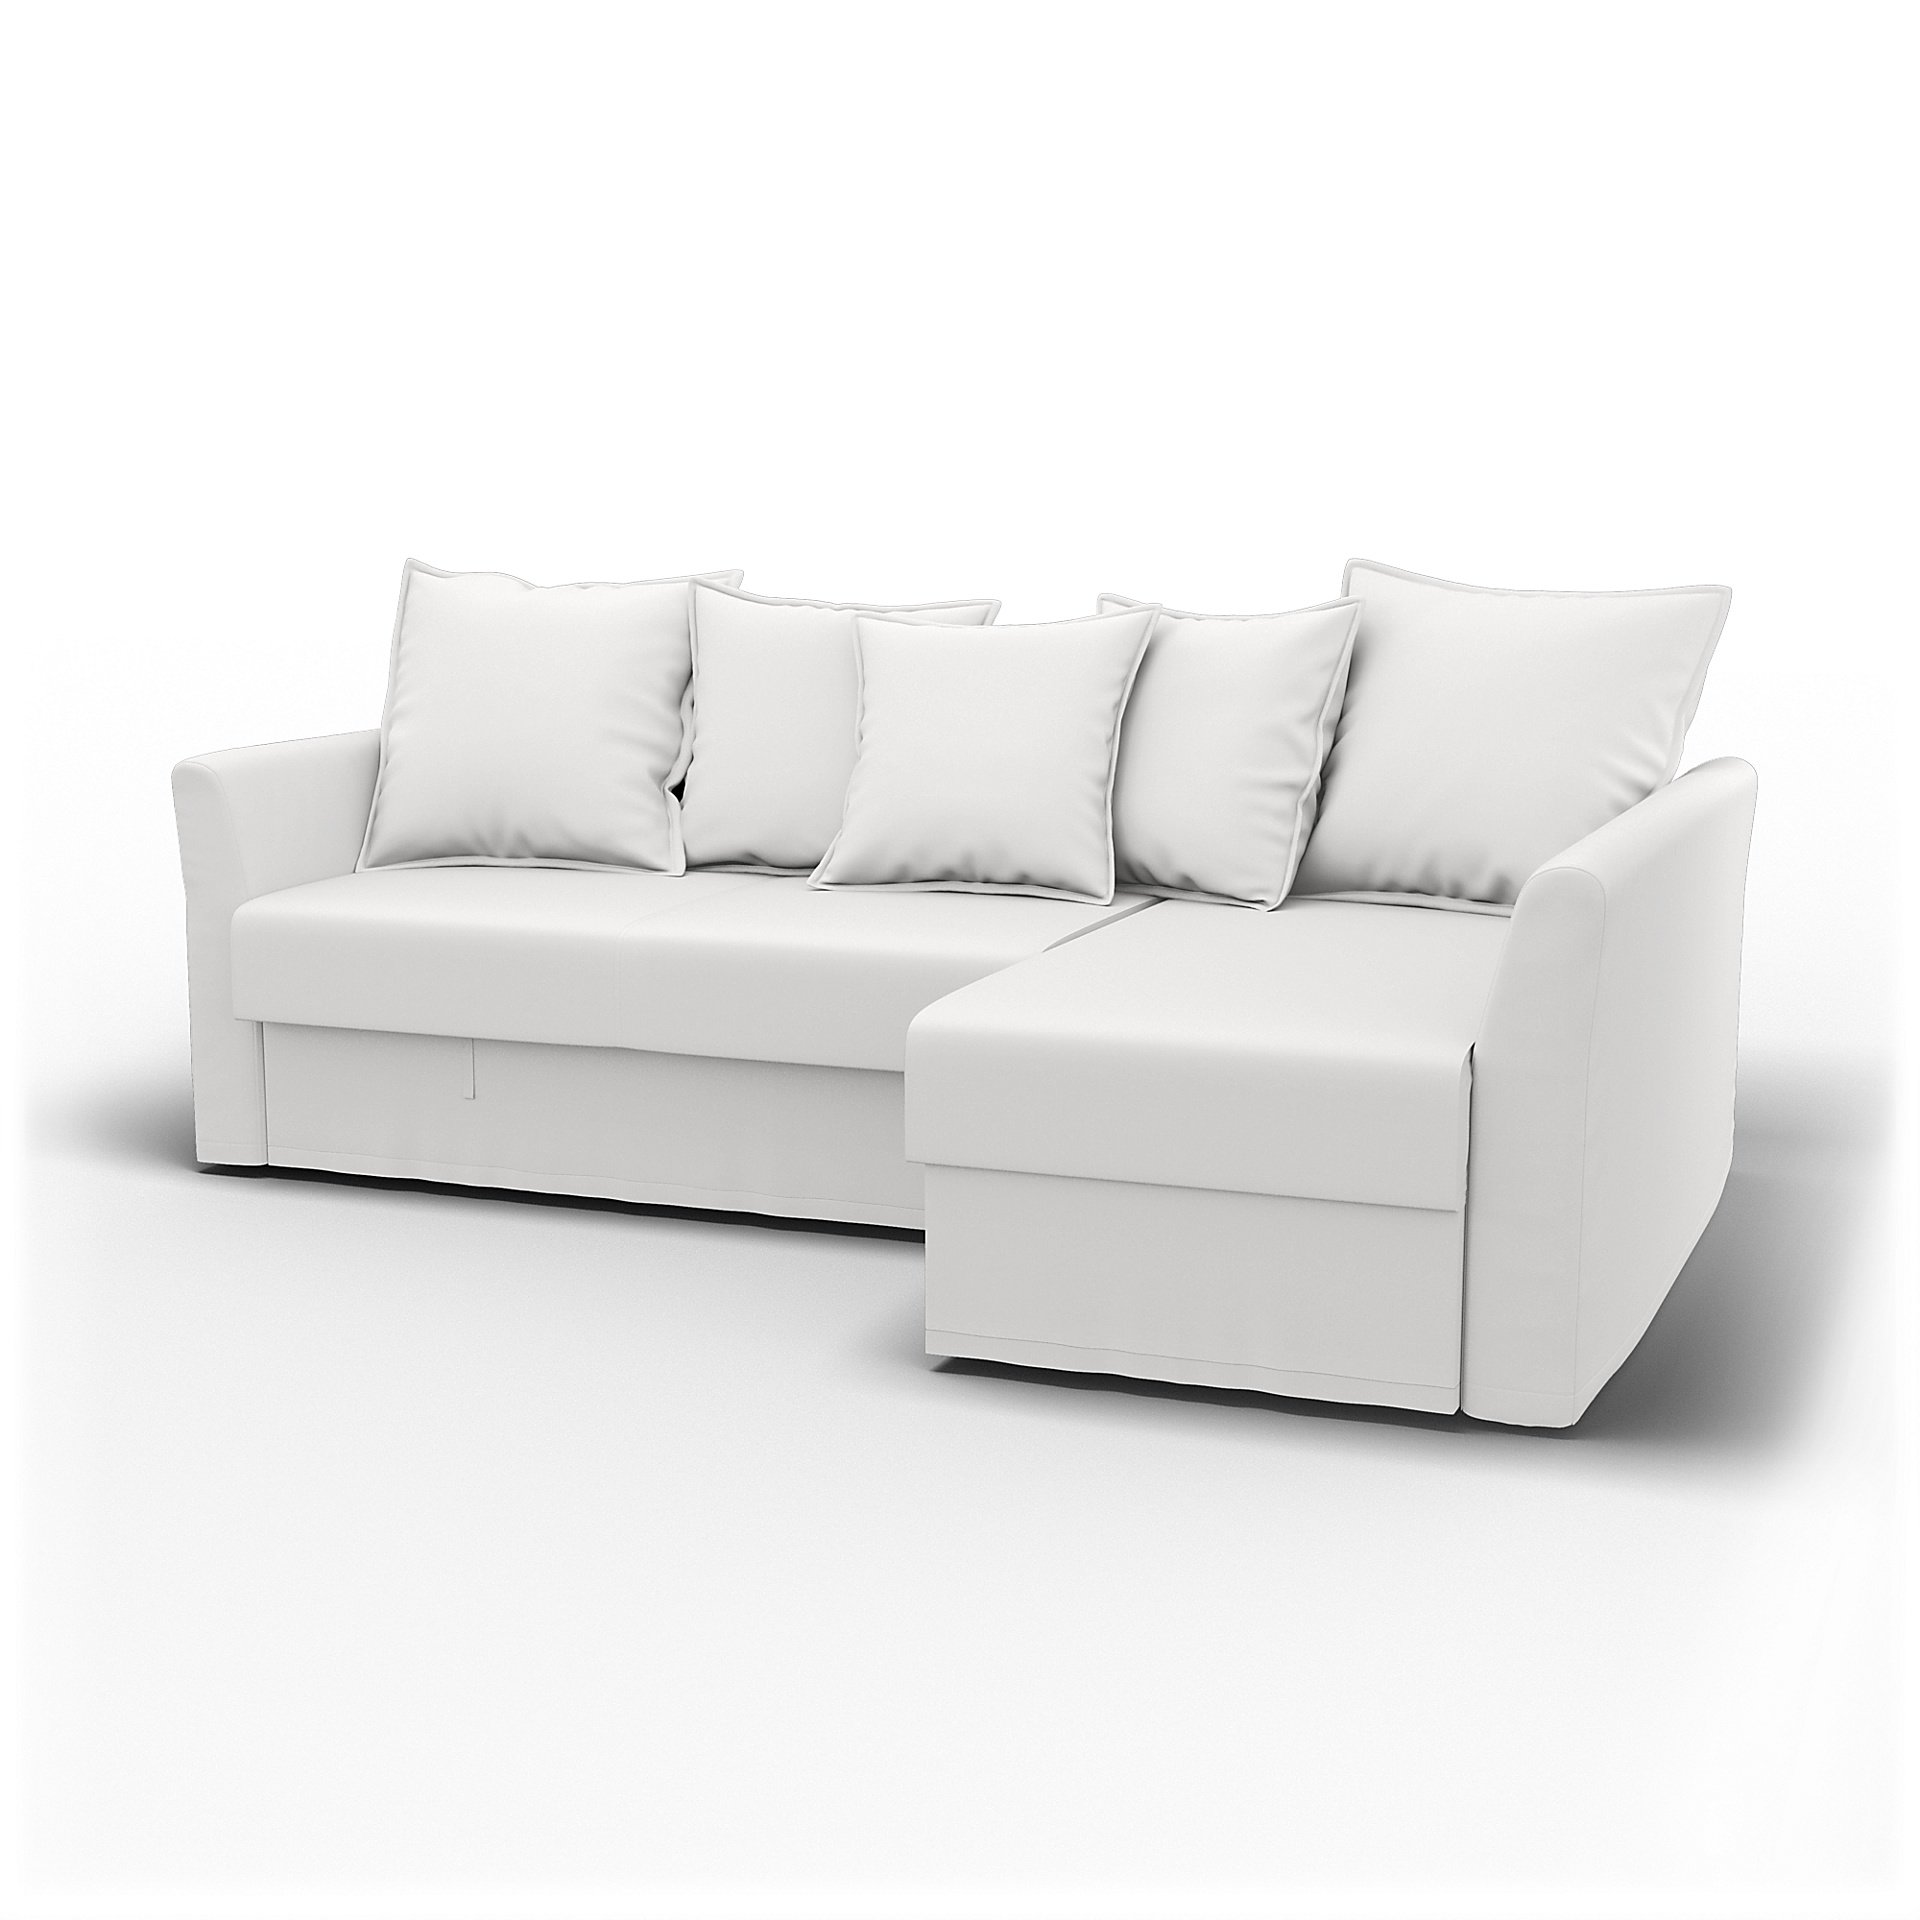 IKEA - Holmsund Sofabed with Chaiselongue, Absolute White, Cotton - Bemz